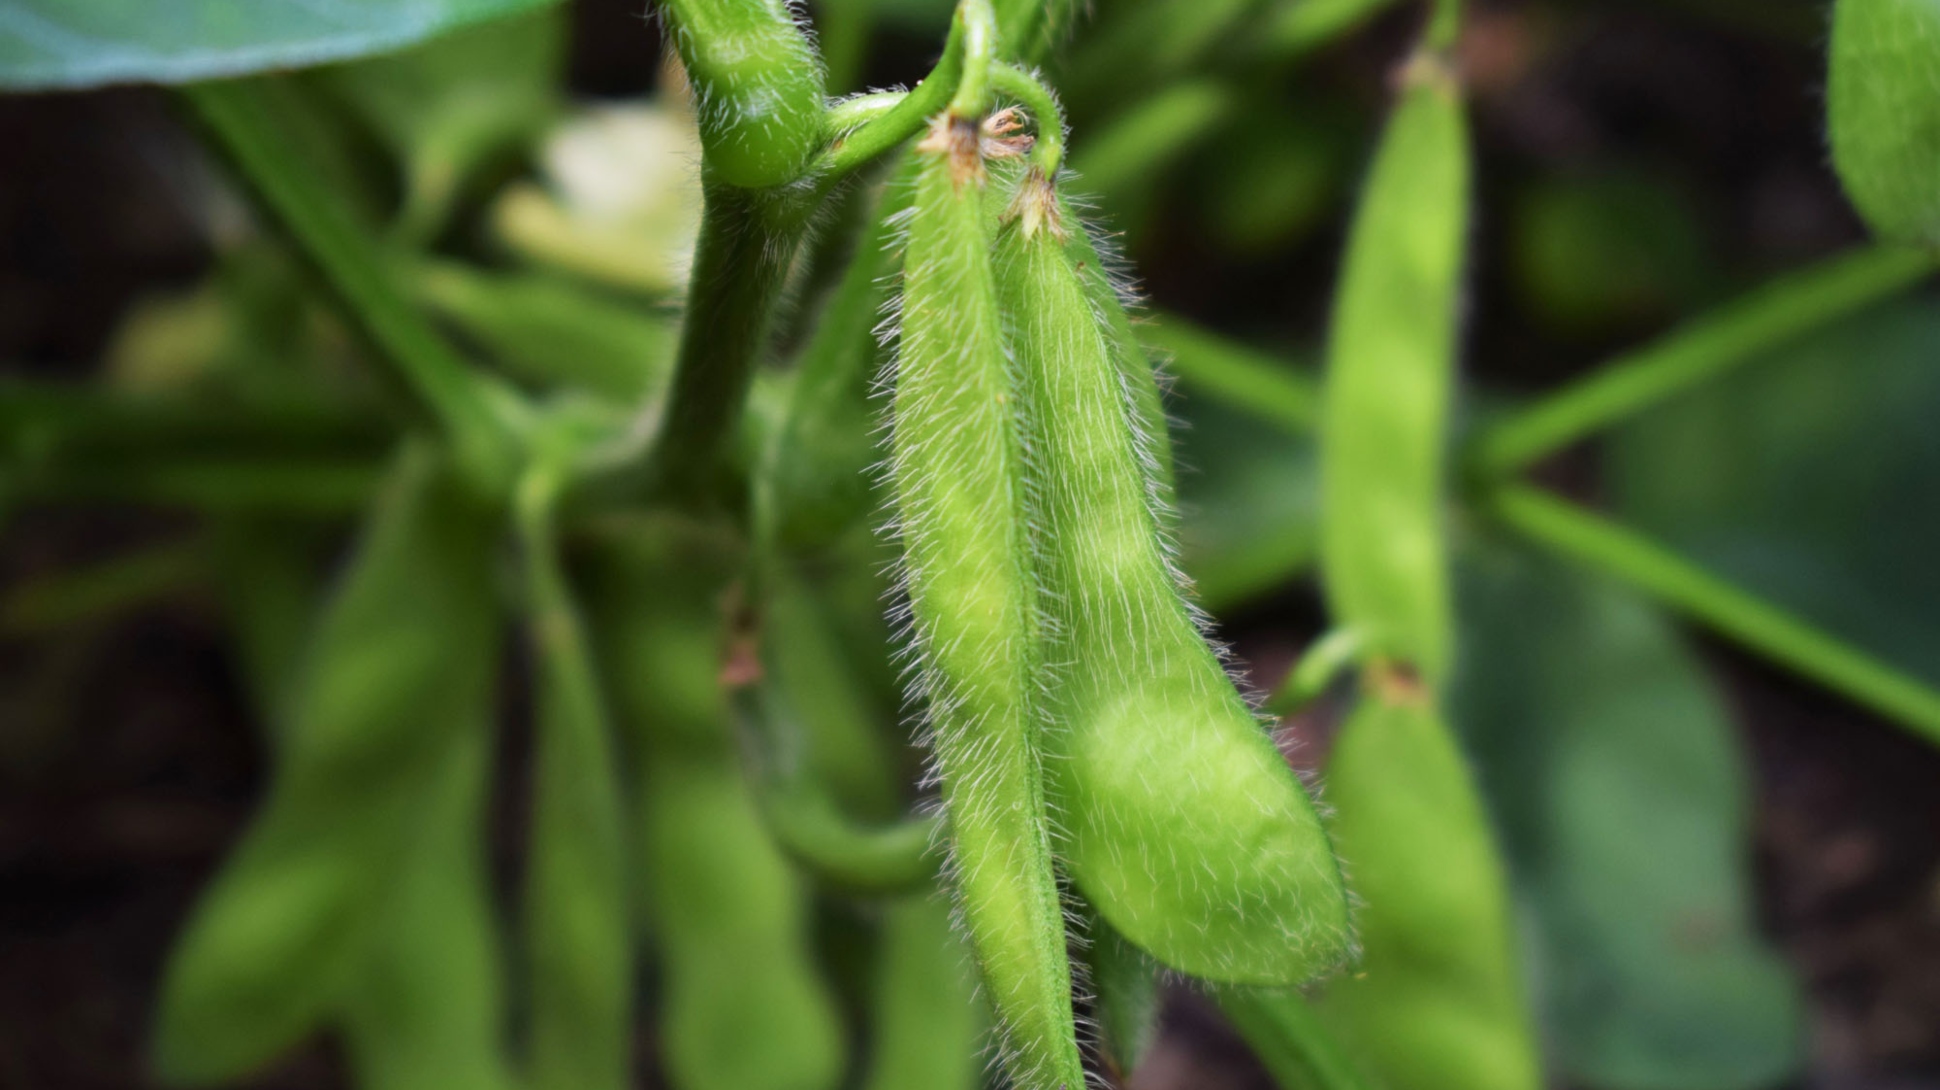 A pair of green furry soybean pods growing